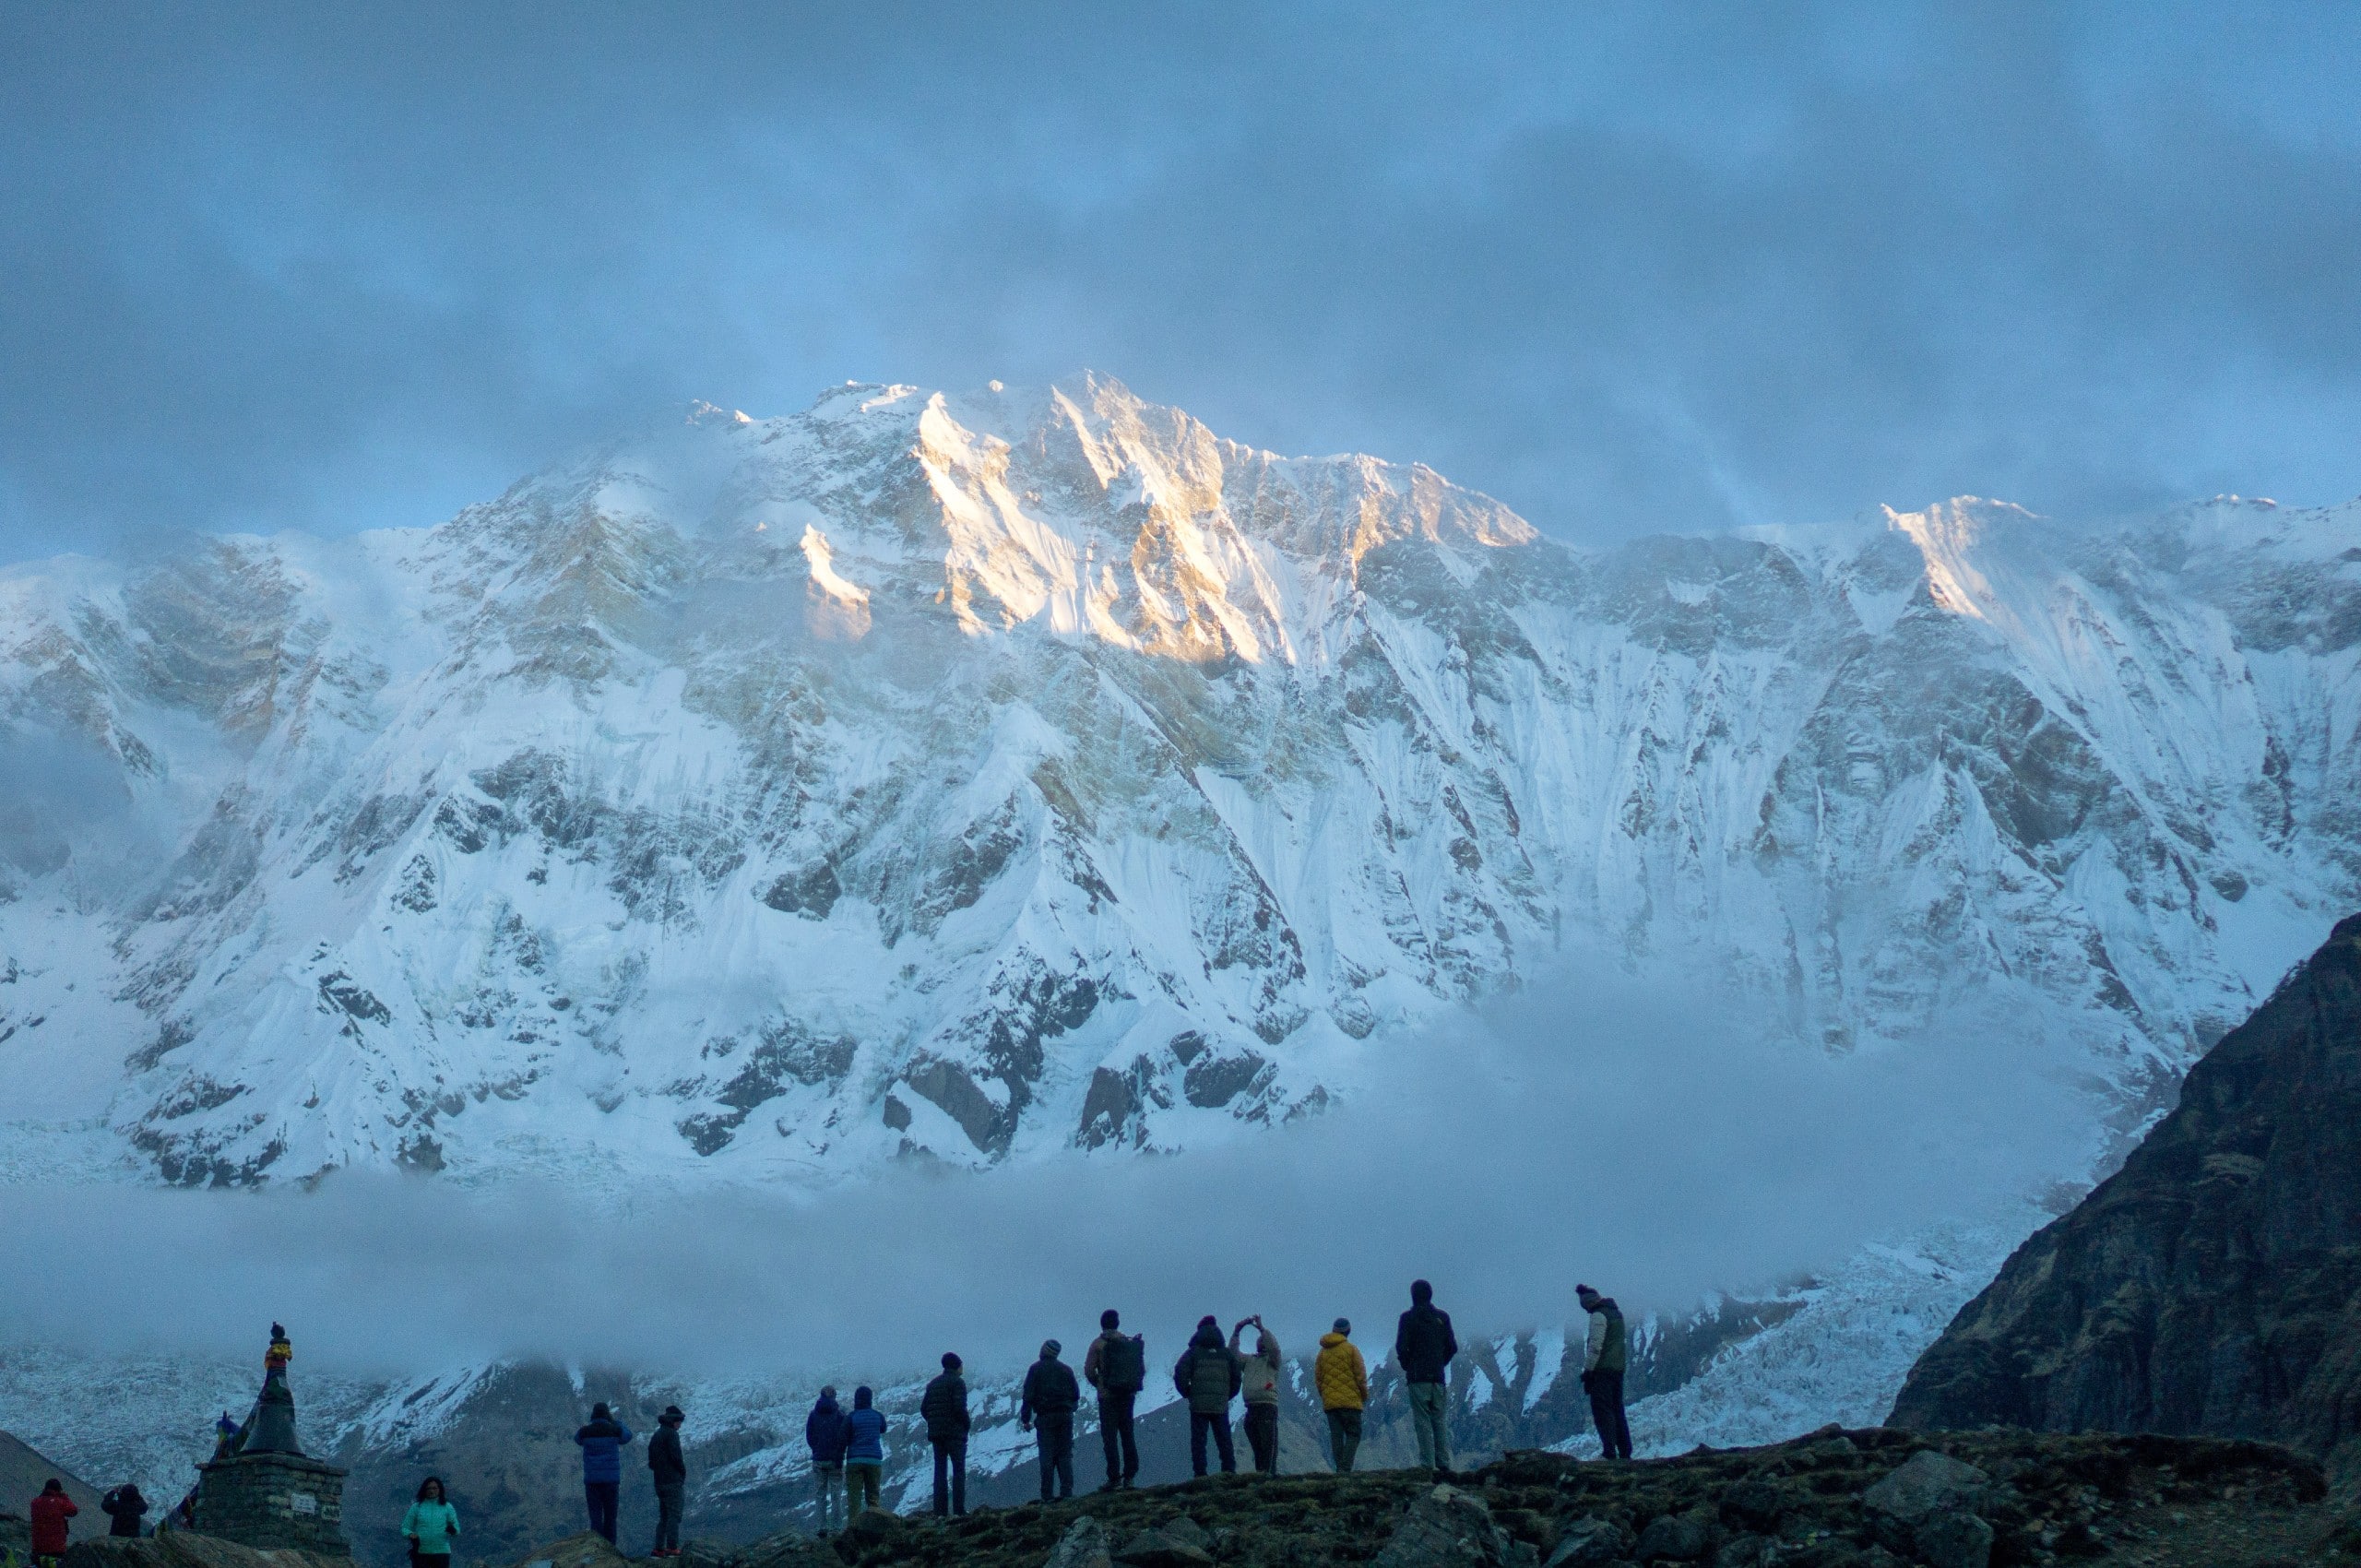 Nepal is home for numerous tallest peaks in the world